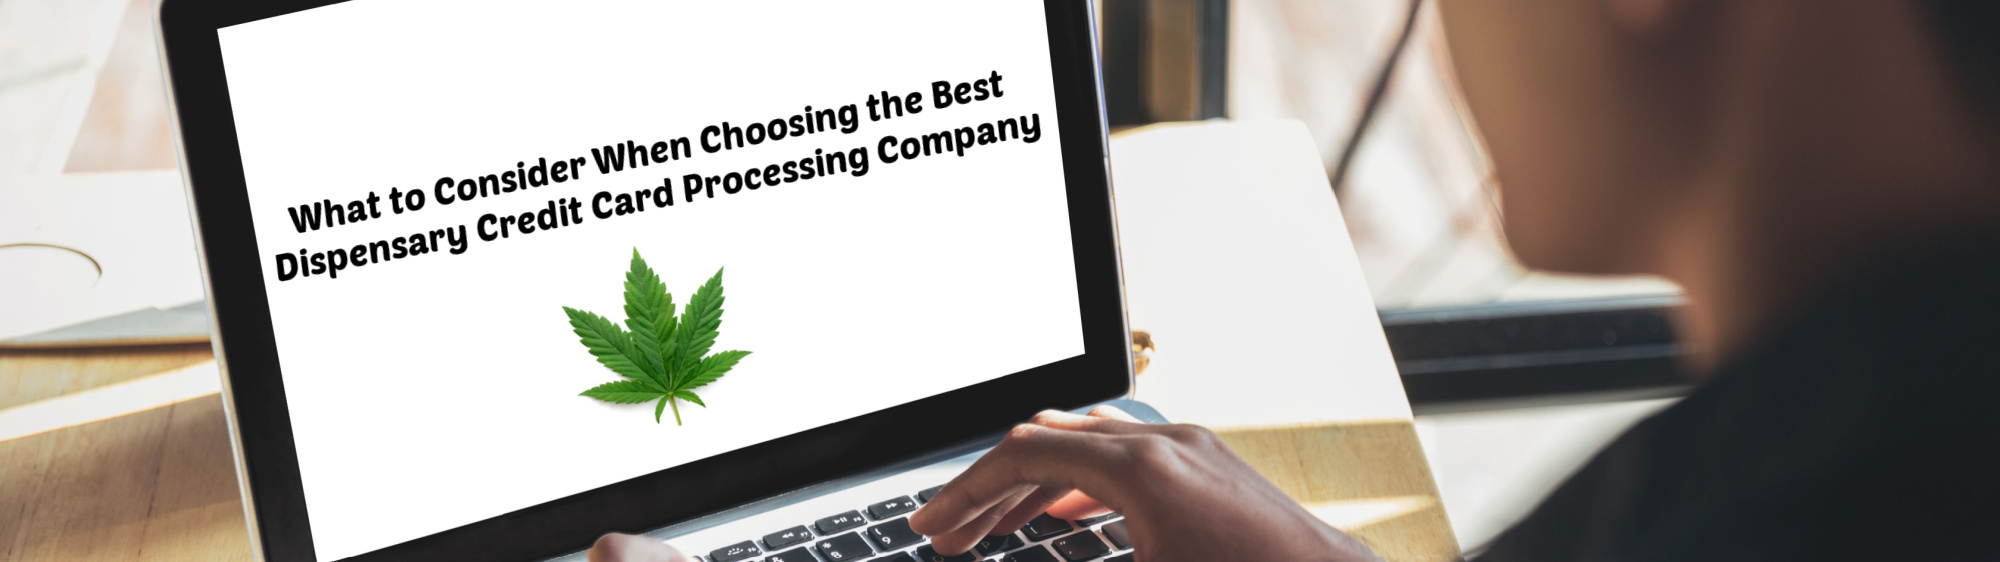 image of what to connsider when choosing the best dispensary credit card processing company